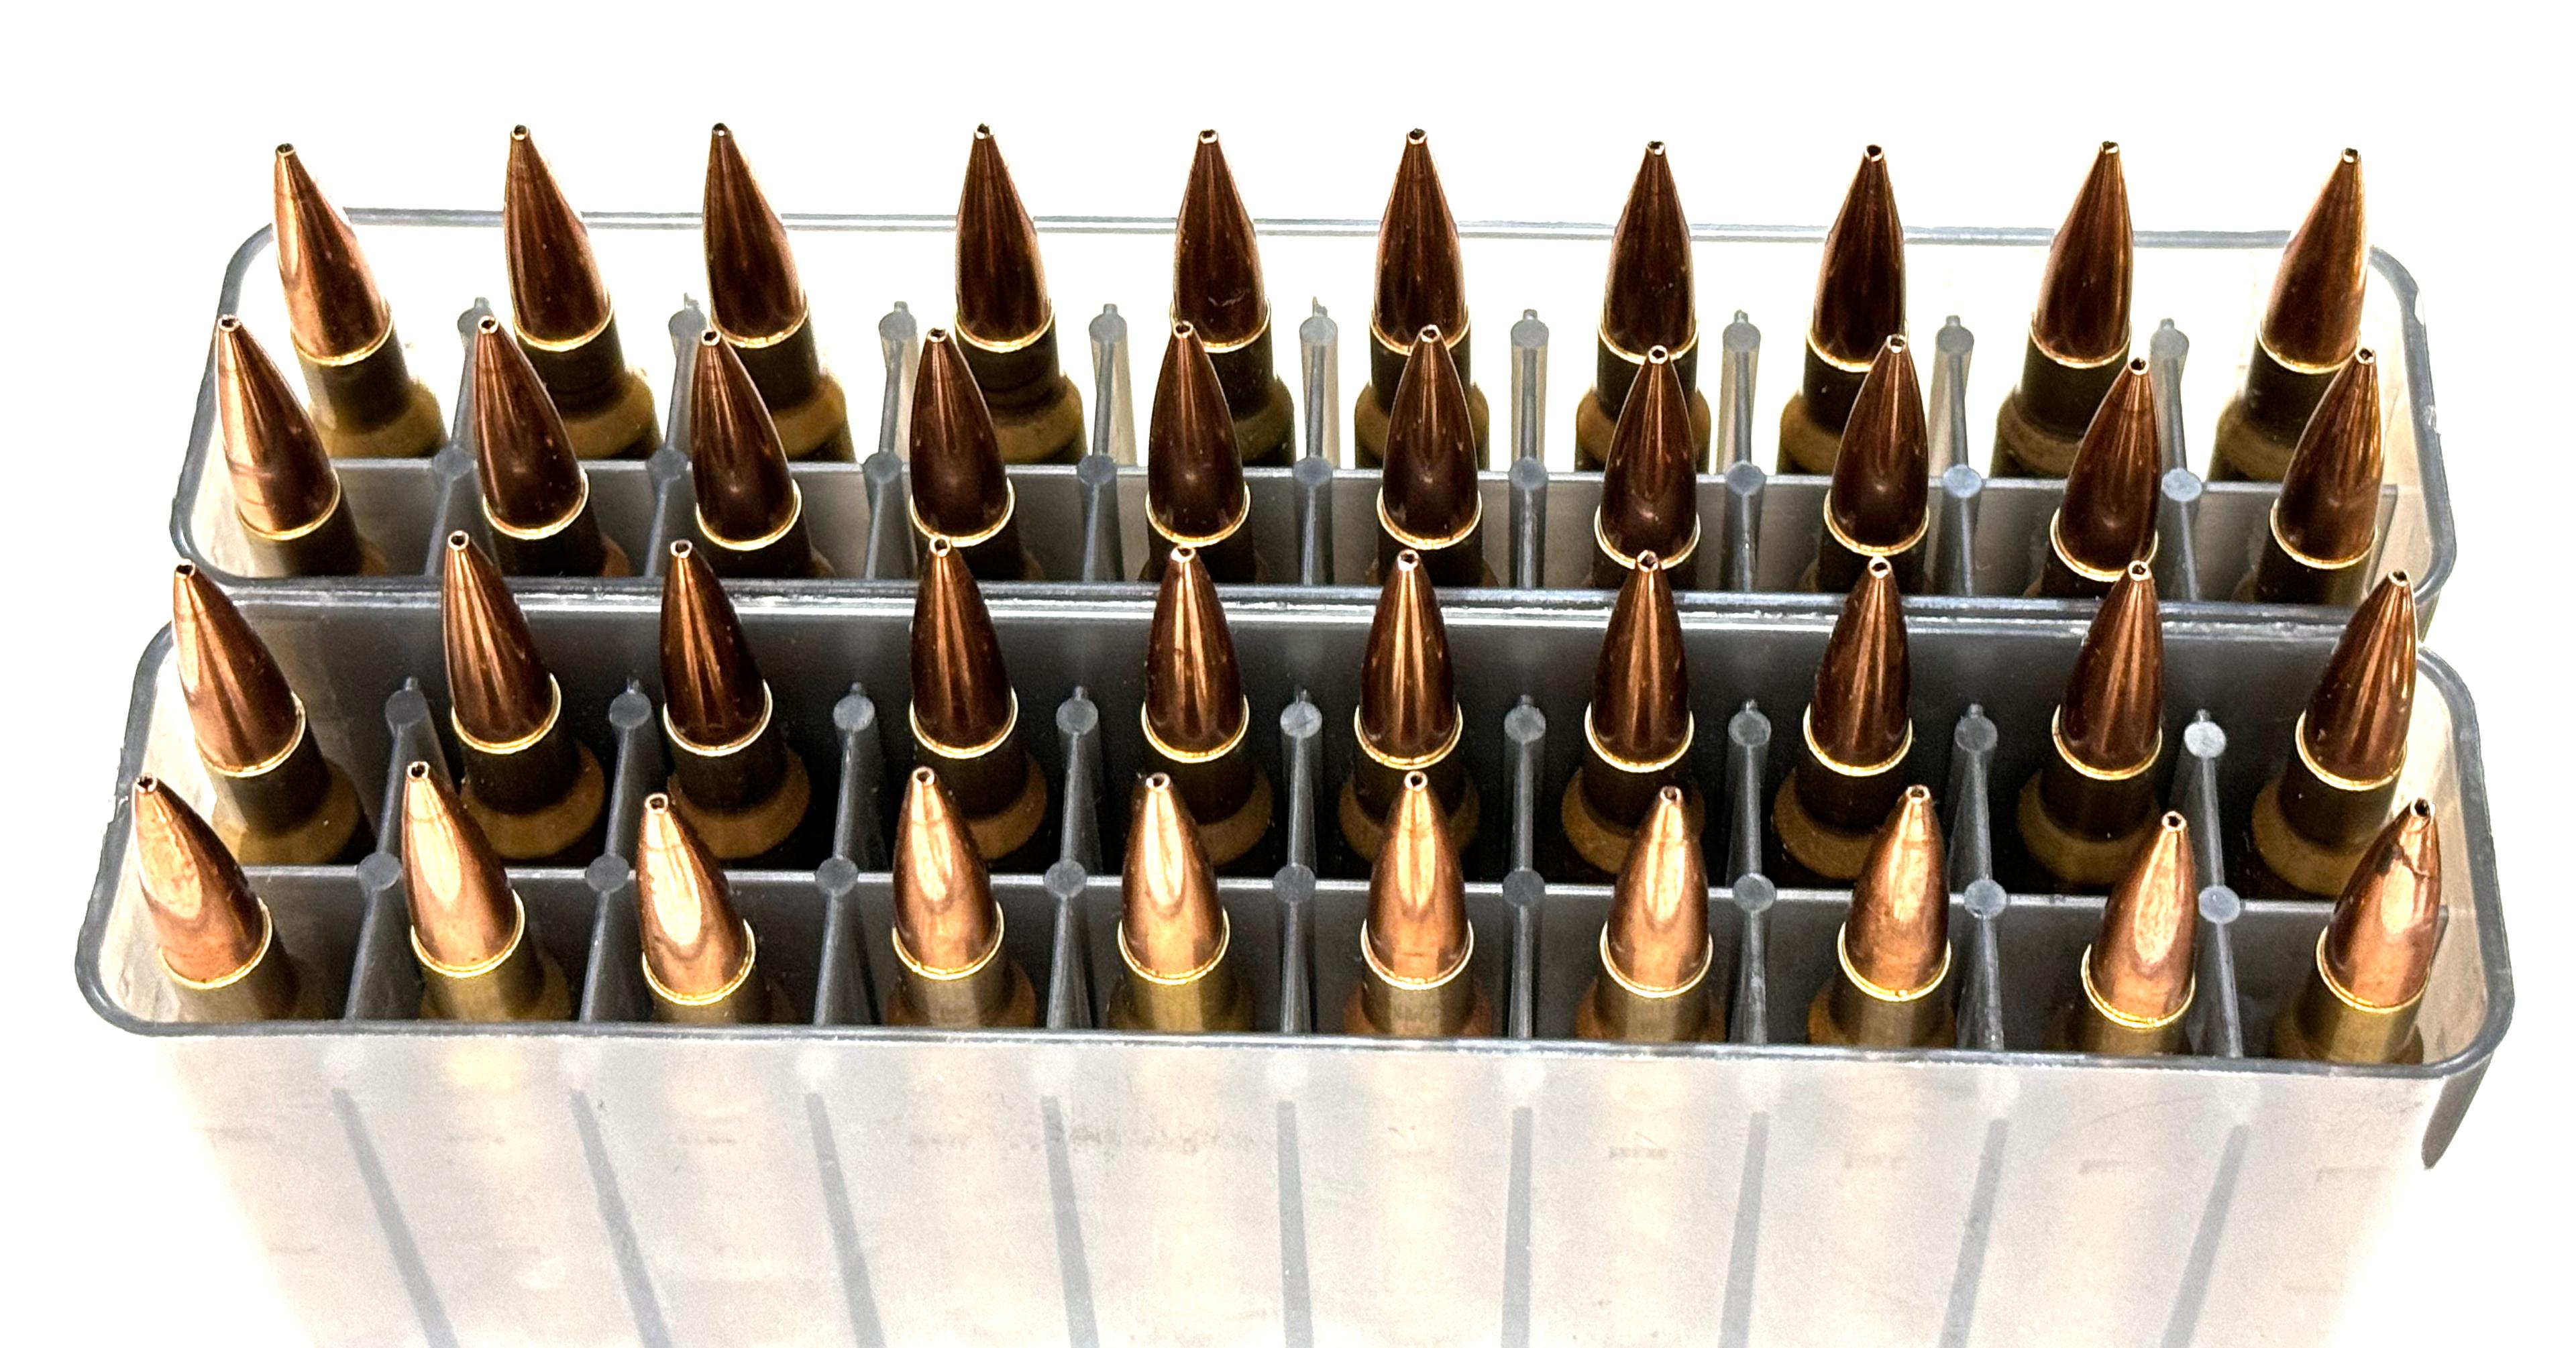 40rds. of 7MM MAUSER, 11rds. of 7mm REM MAG, and 3rds. of .338 WIN MAG Ammunition